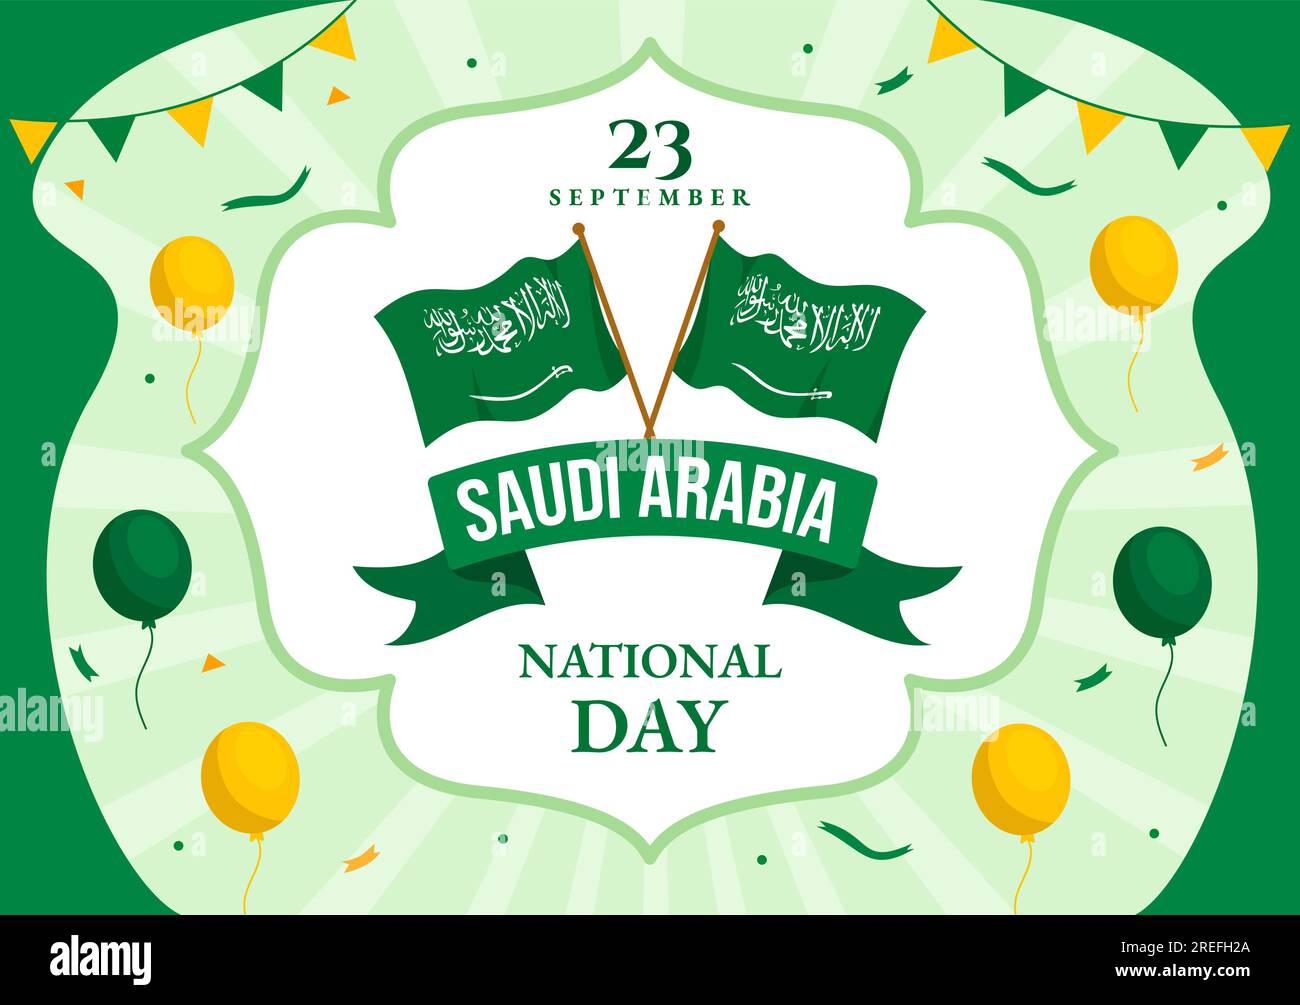 Happy Saudi Arabia National Day Vector Illustration on September 23 with Waving Flag Background in Flat Cartoon Hand Drawn Landing Page Templates Stock Vector